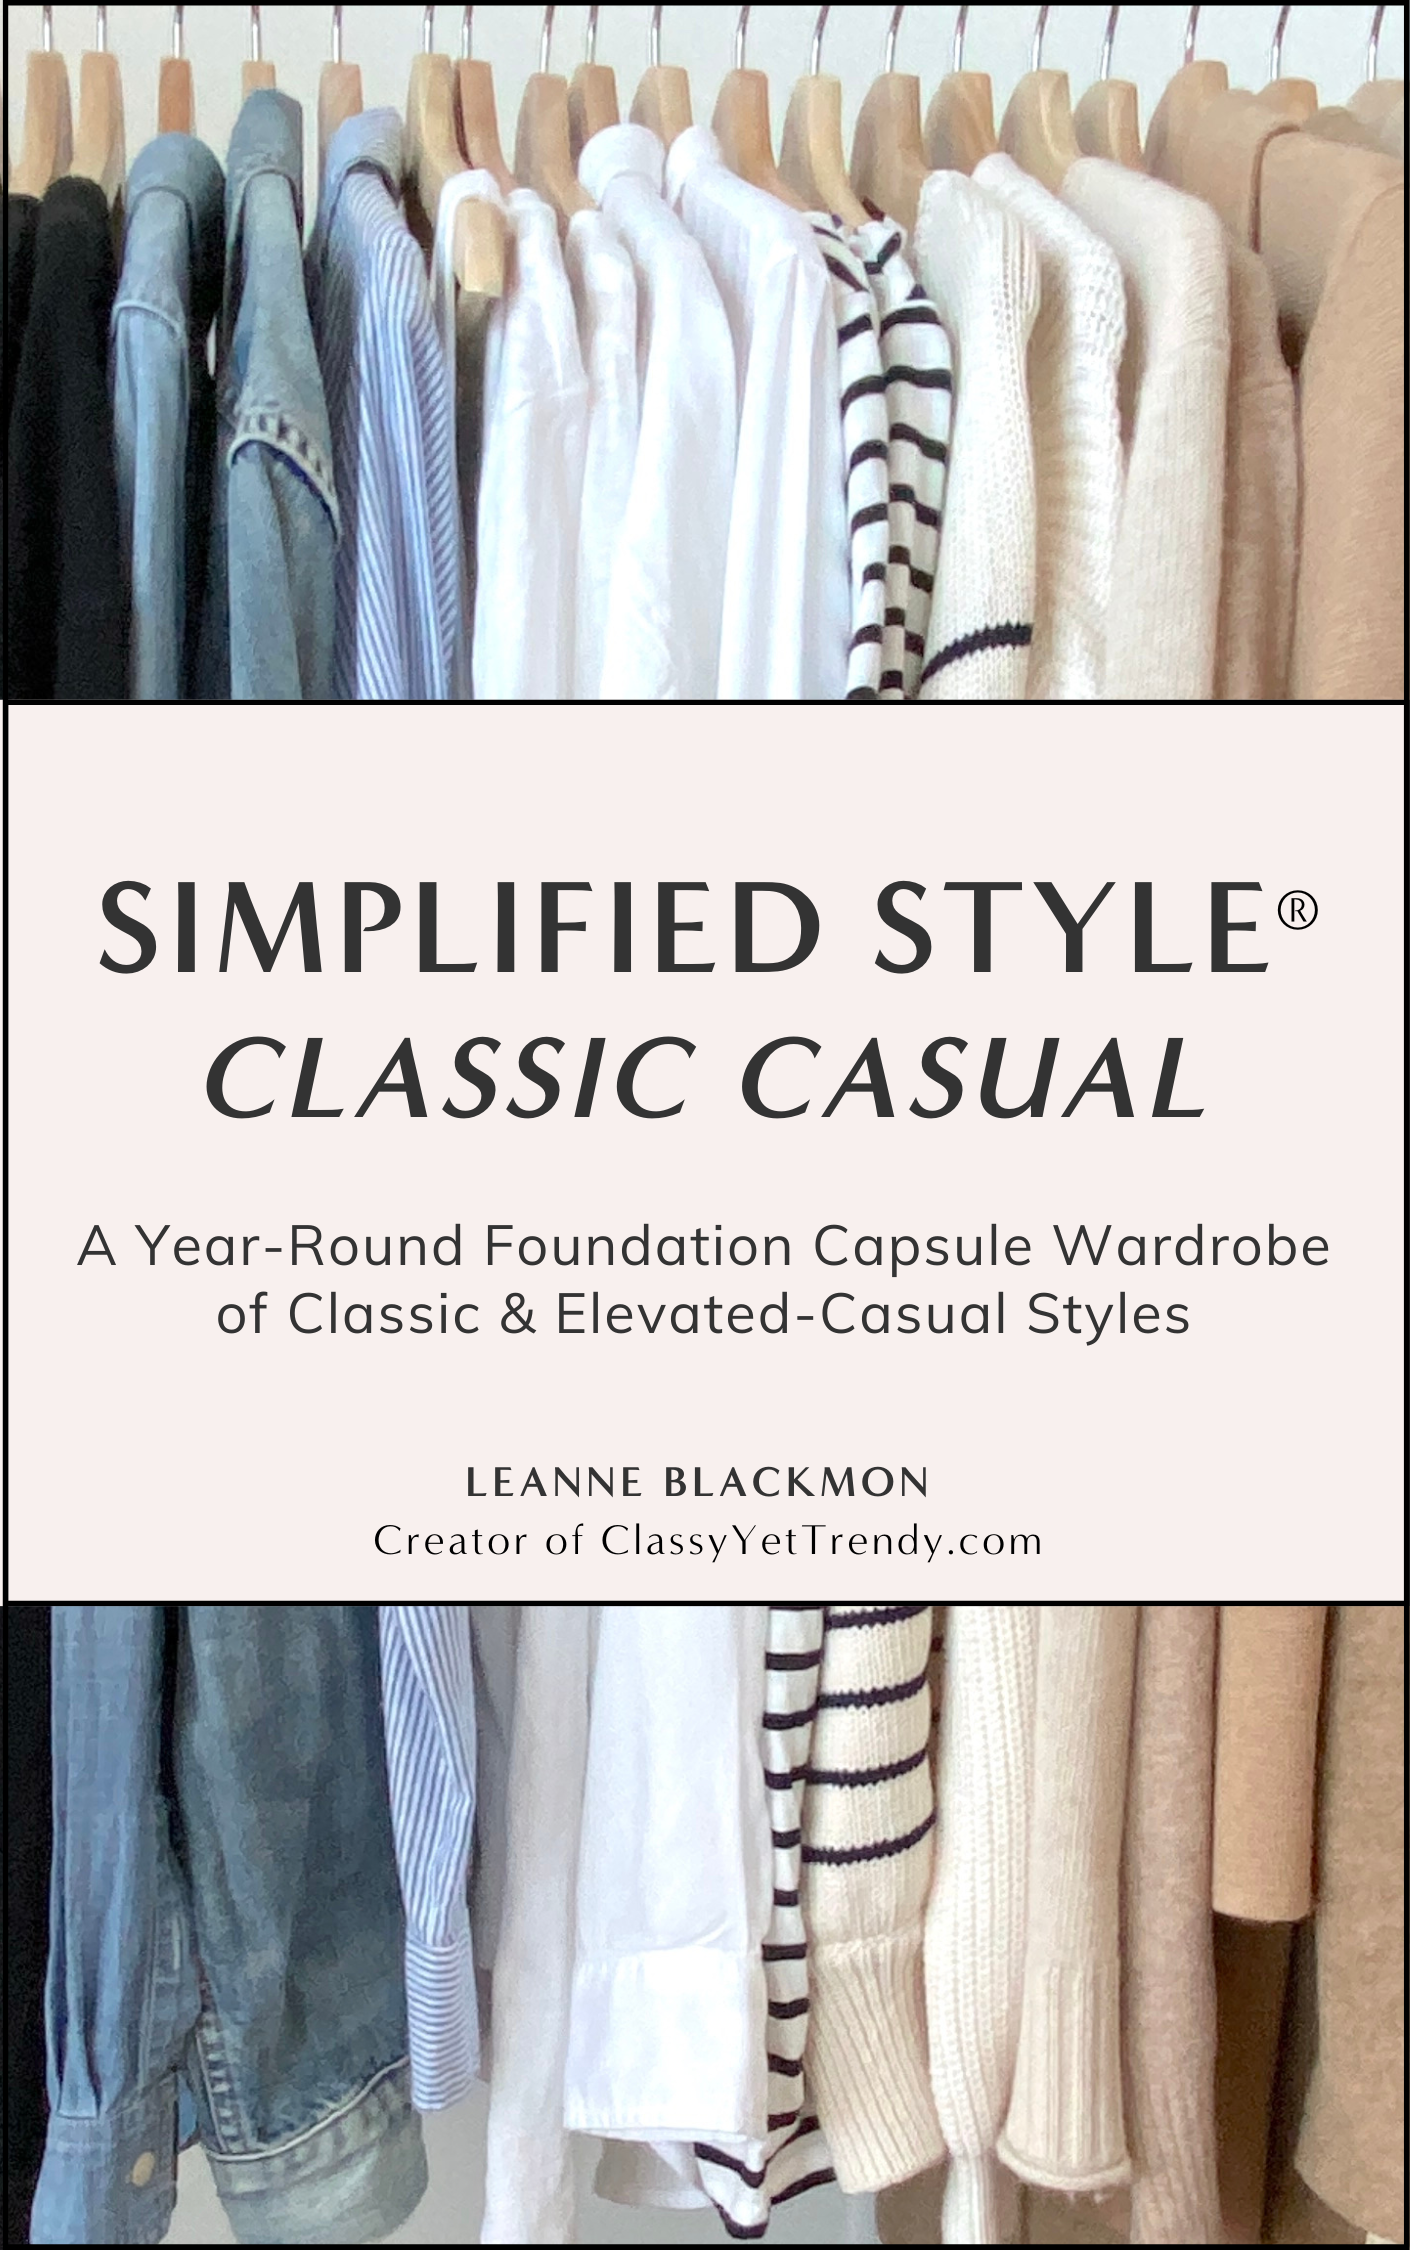 Classic style personality - A style guide and capsule wardrobe